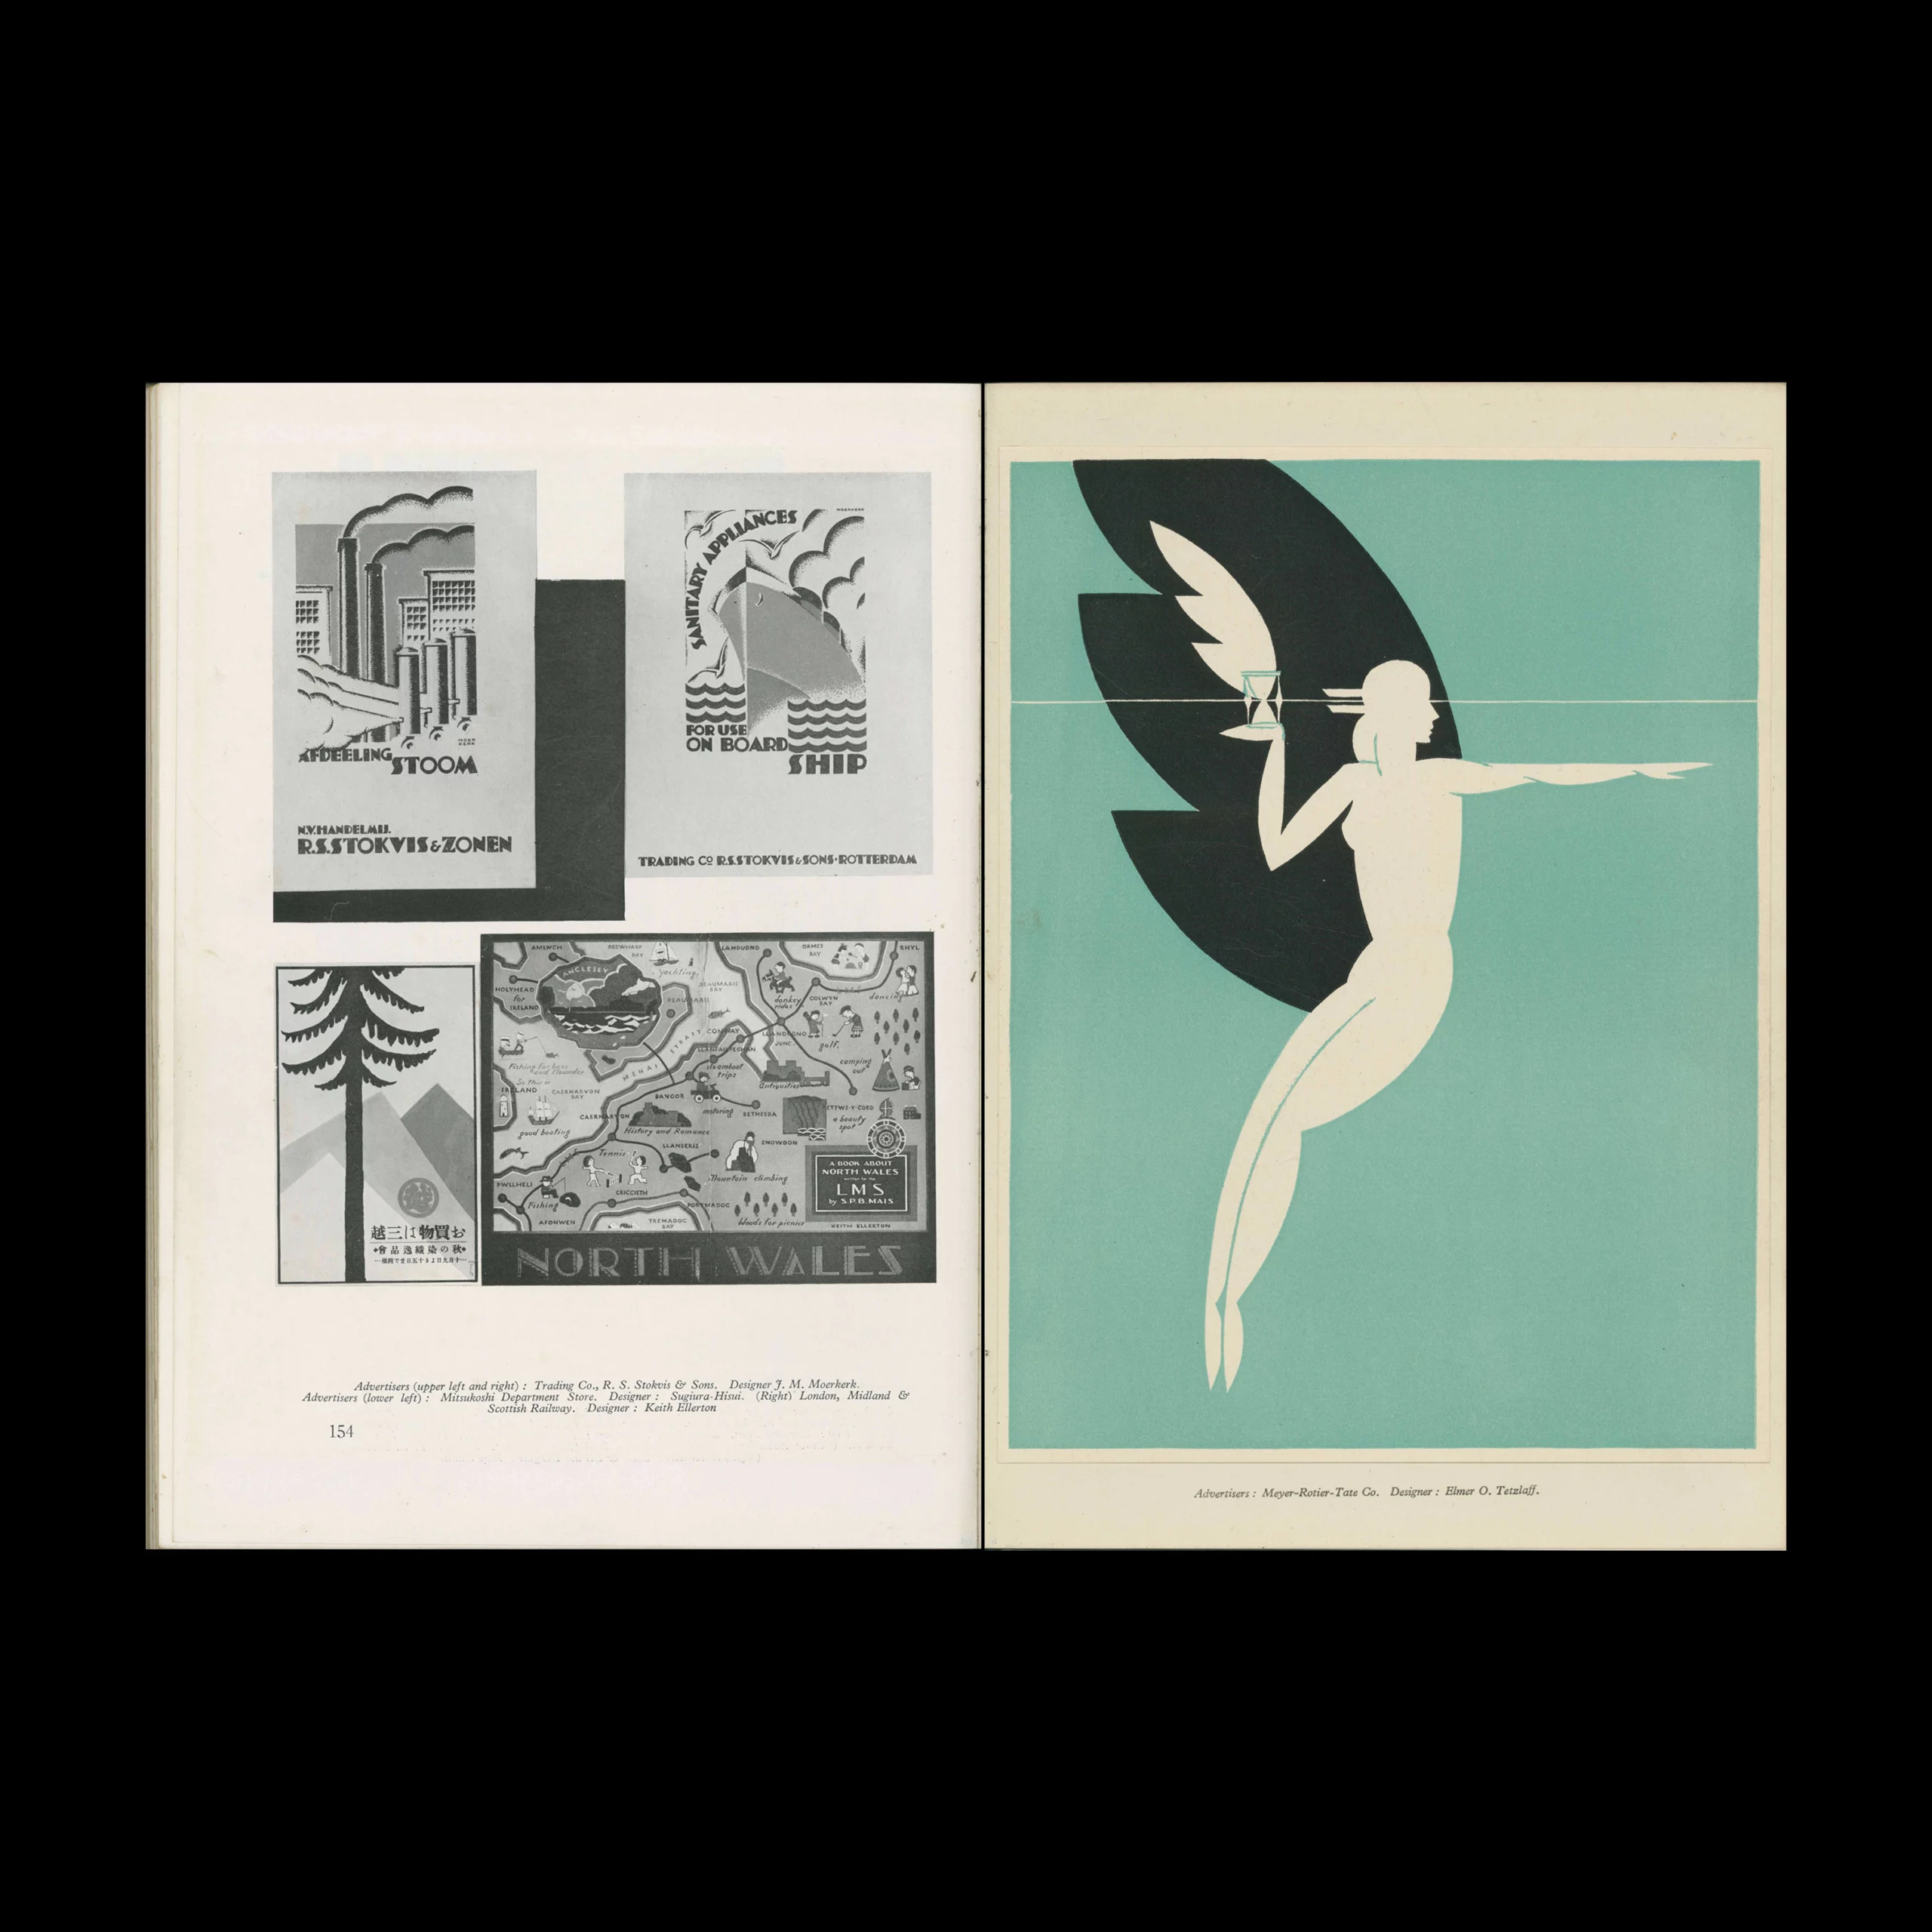 Posters and Publicity 1929, Commercial Art Annual, The Studio, 1929